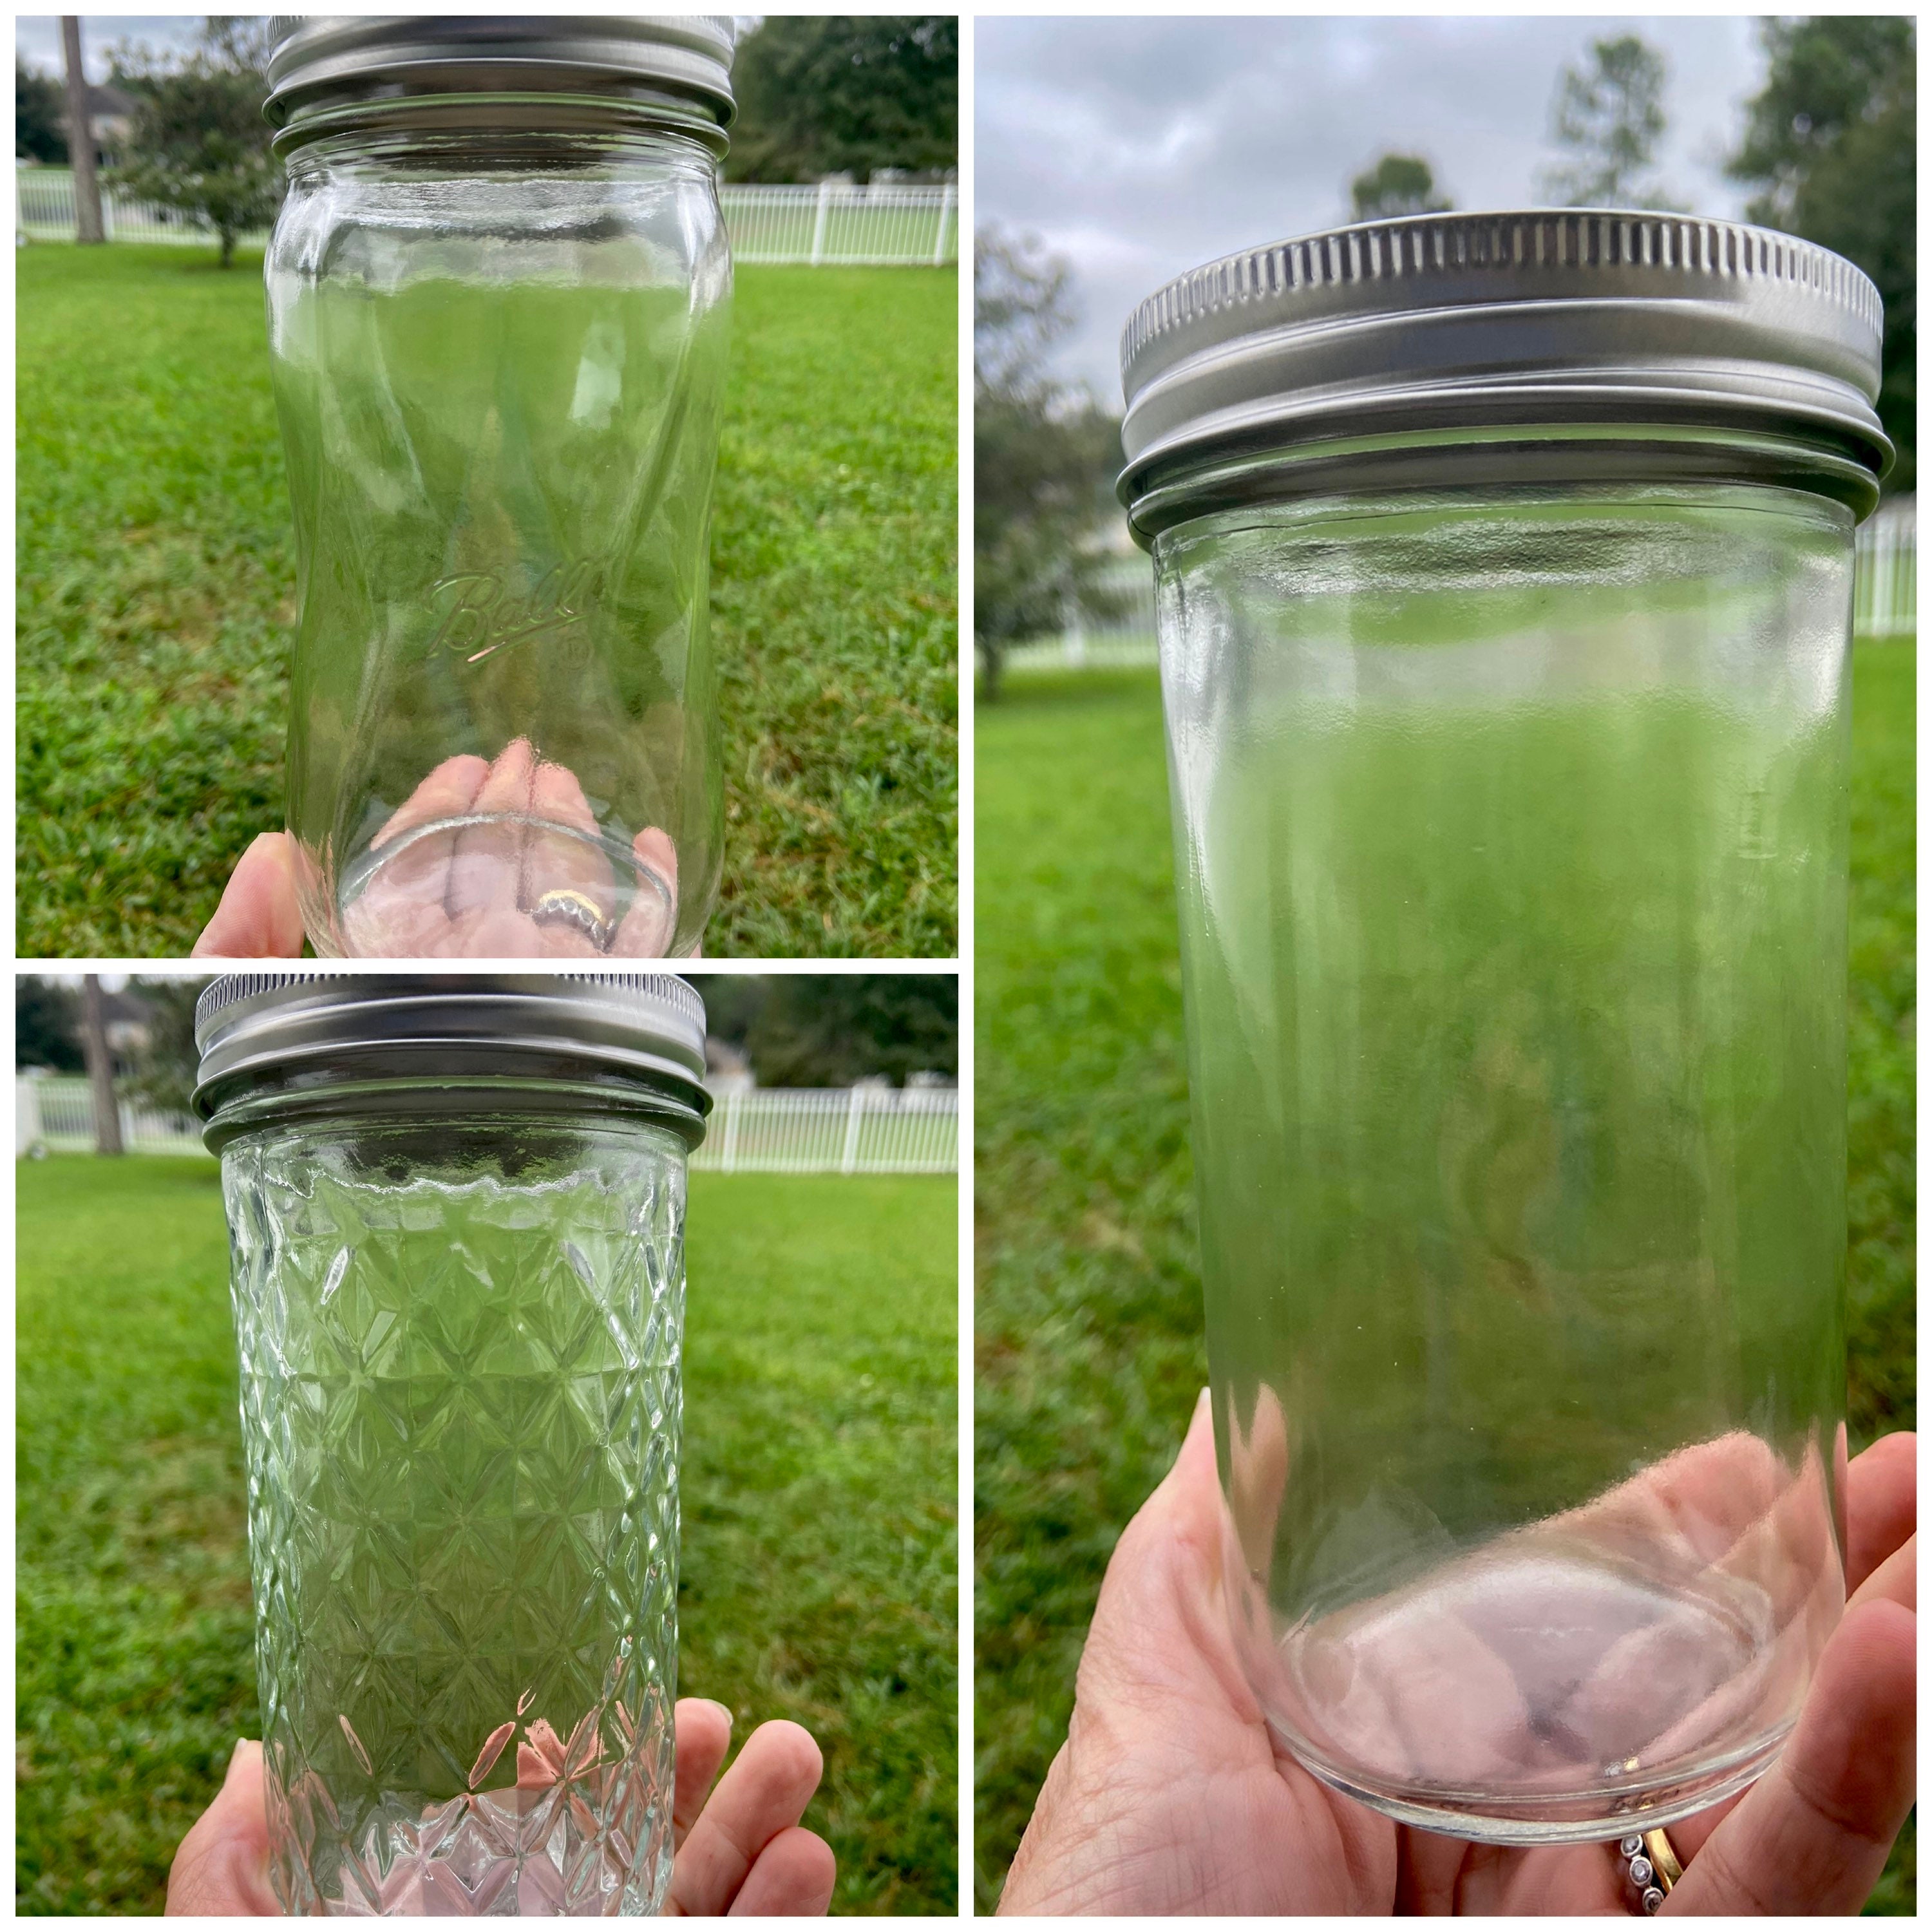 DIY: How to Make a Glass Sippy Cup using a Mason Jar